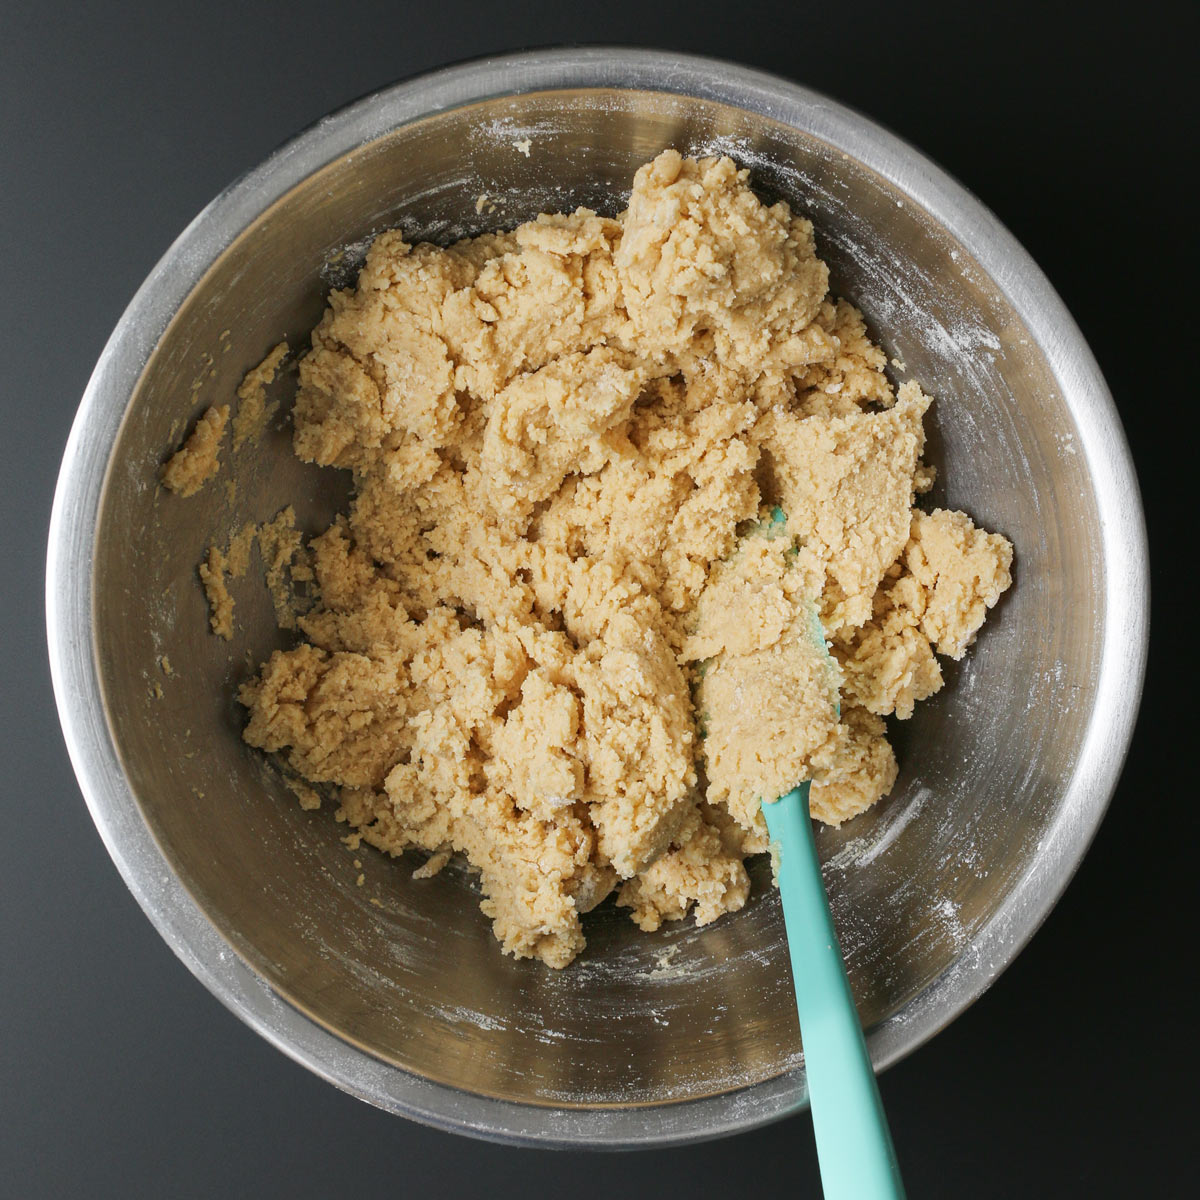 the dough formed in the bowl, with a teal spatula.